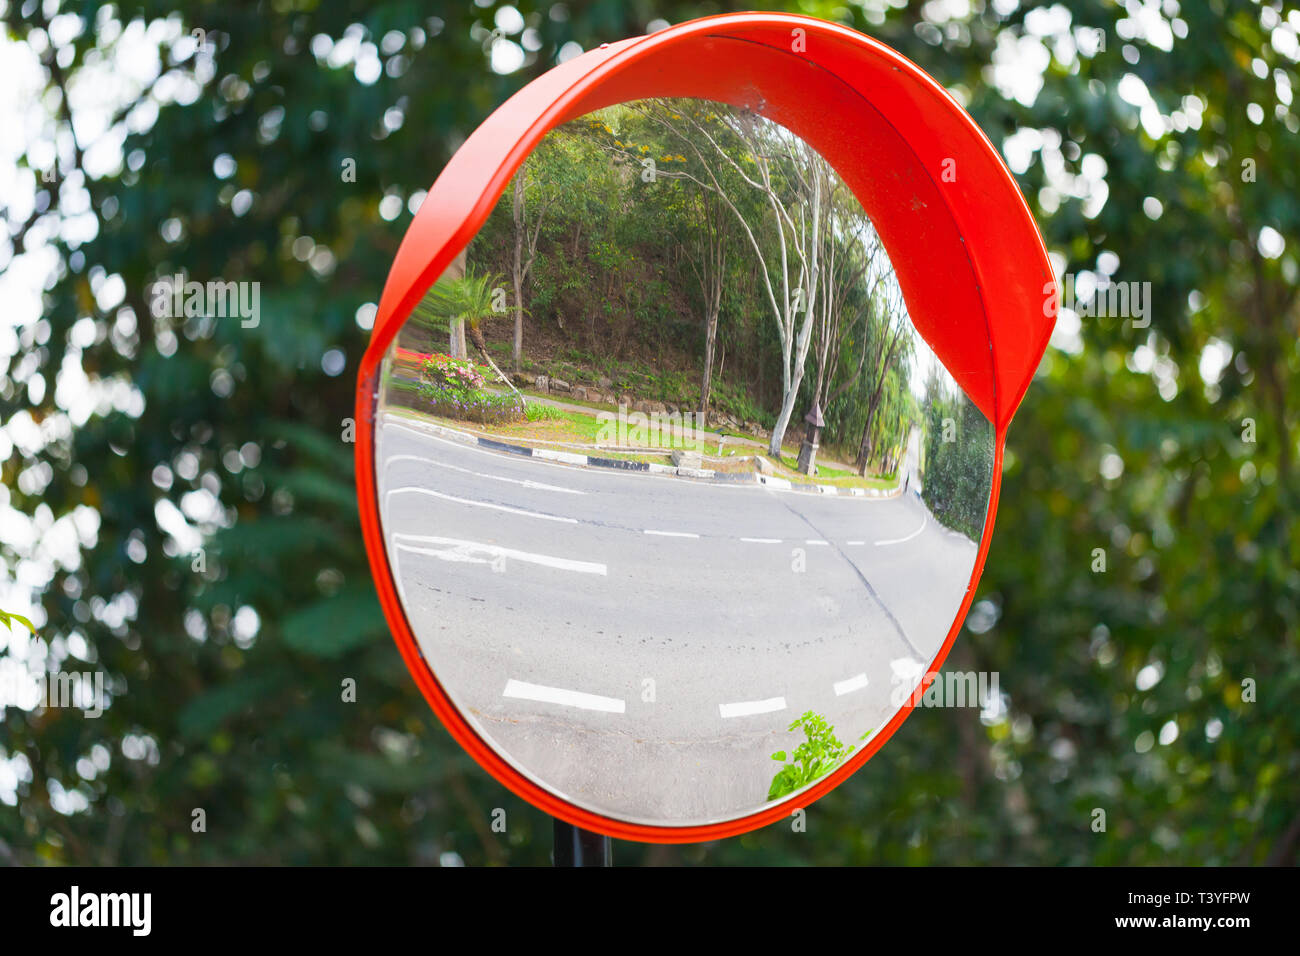 Round mirror in red frame on metal pole at crossing streets for safety Stock Photo